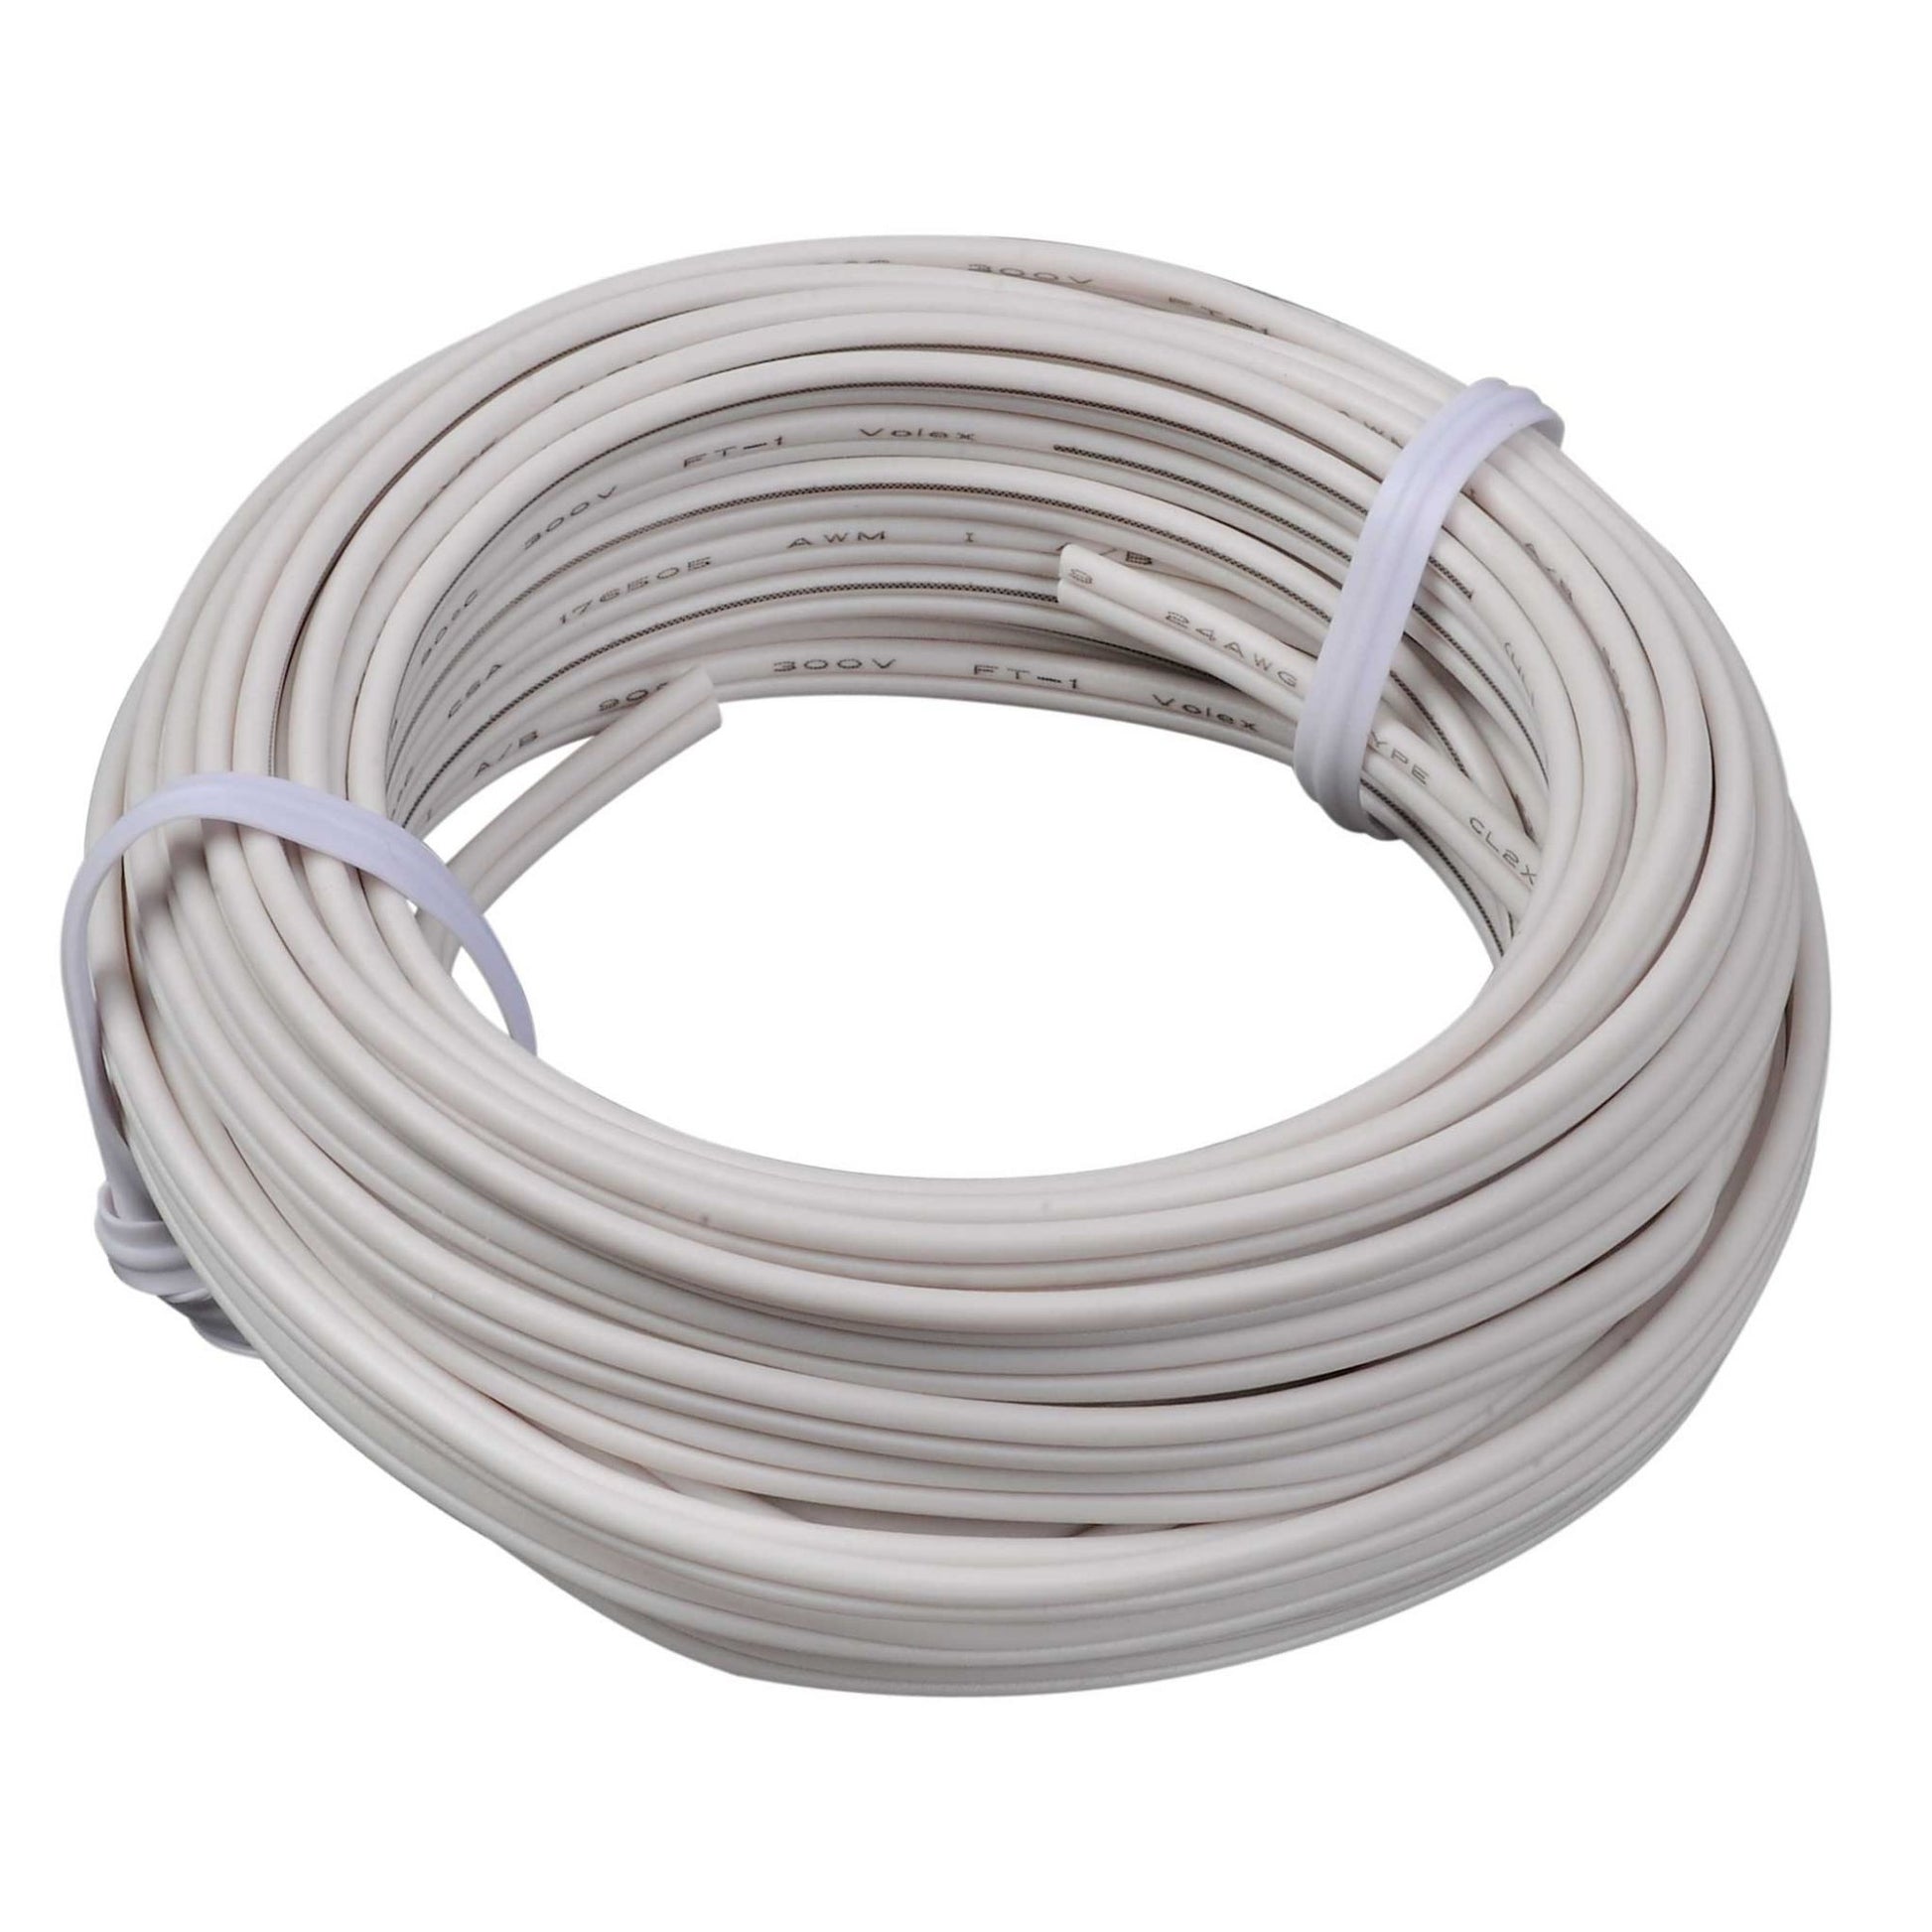 041A0323, Bell Wire, Discontinued, Parts